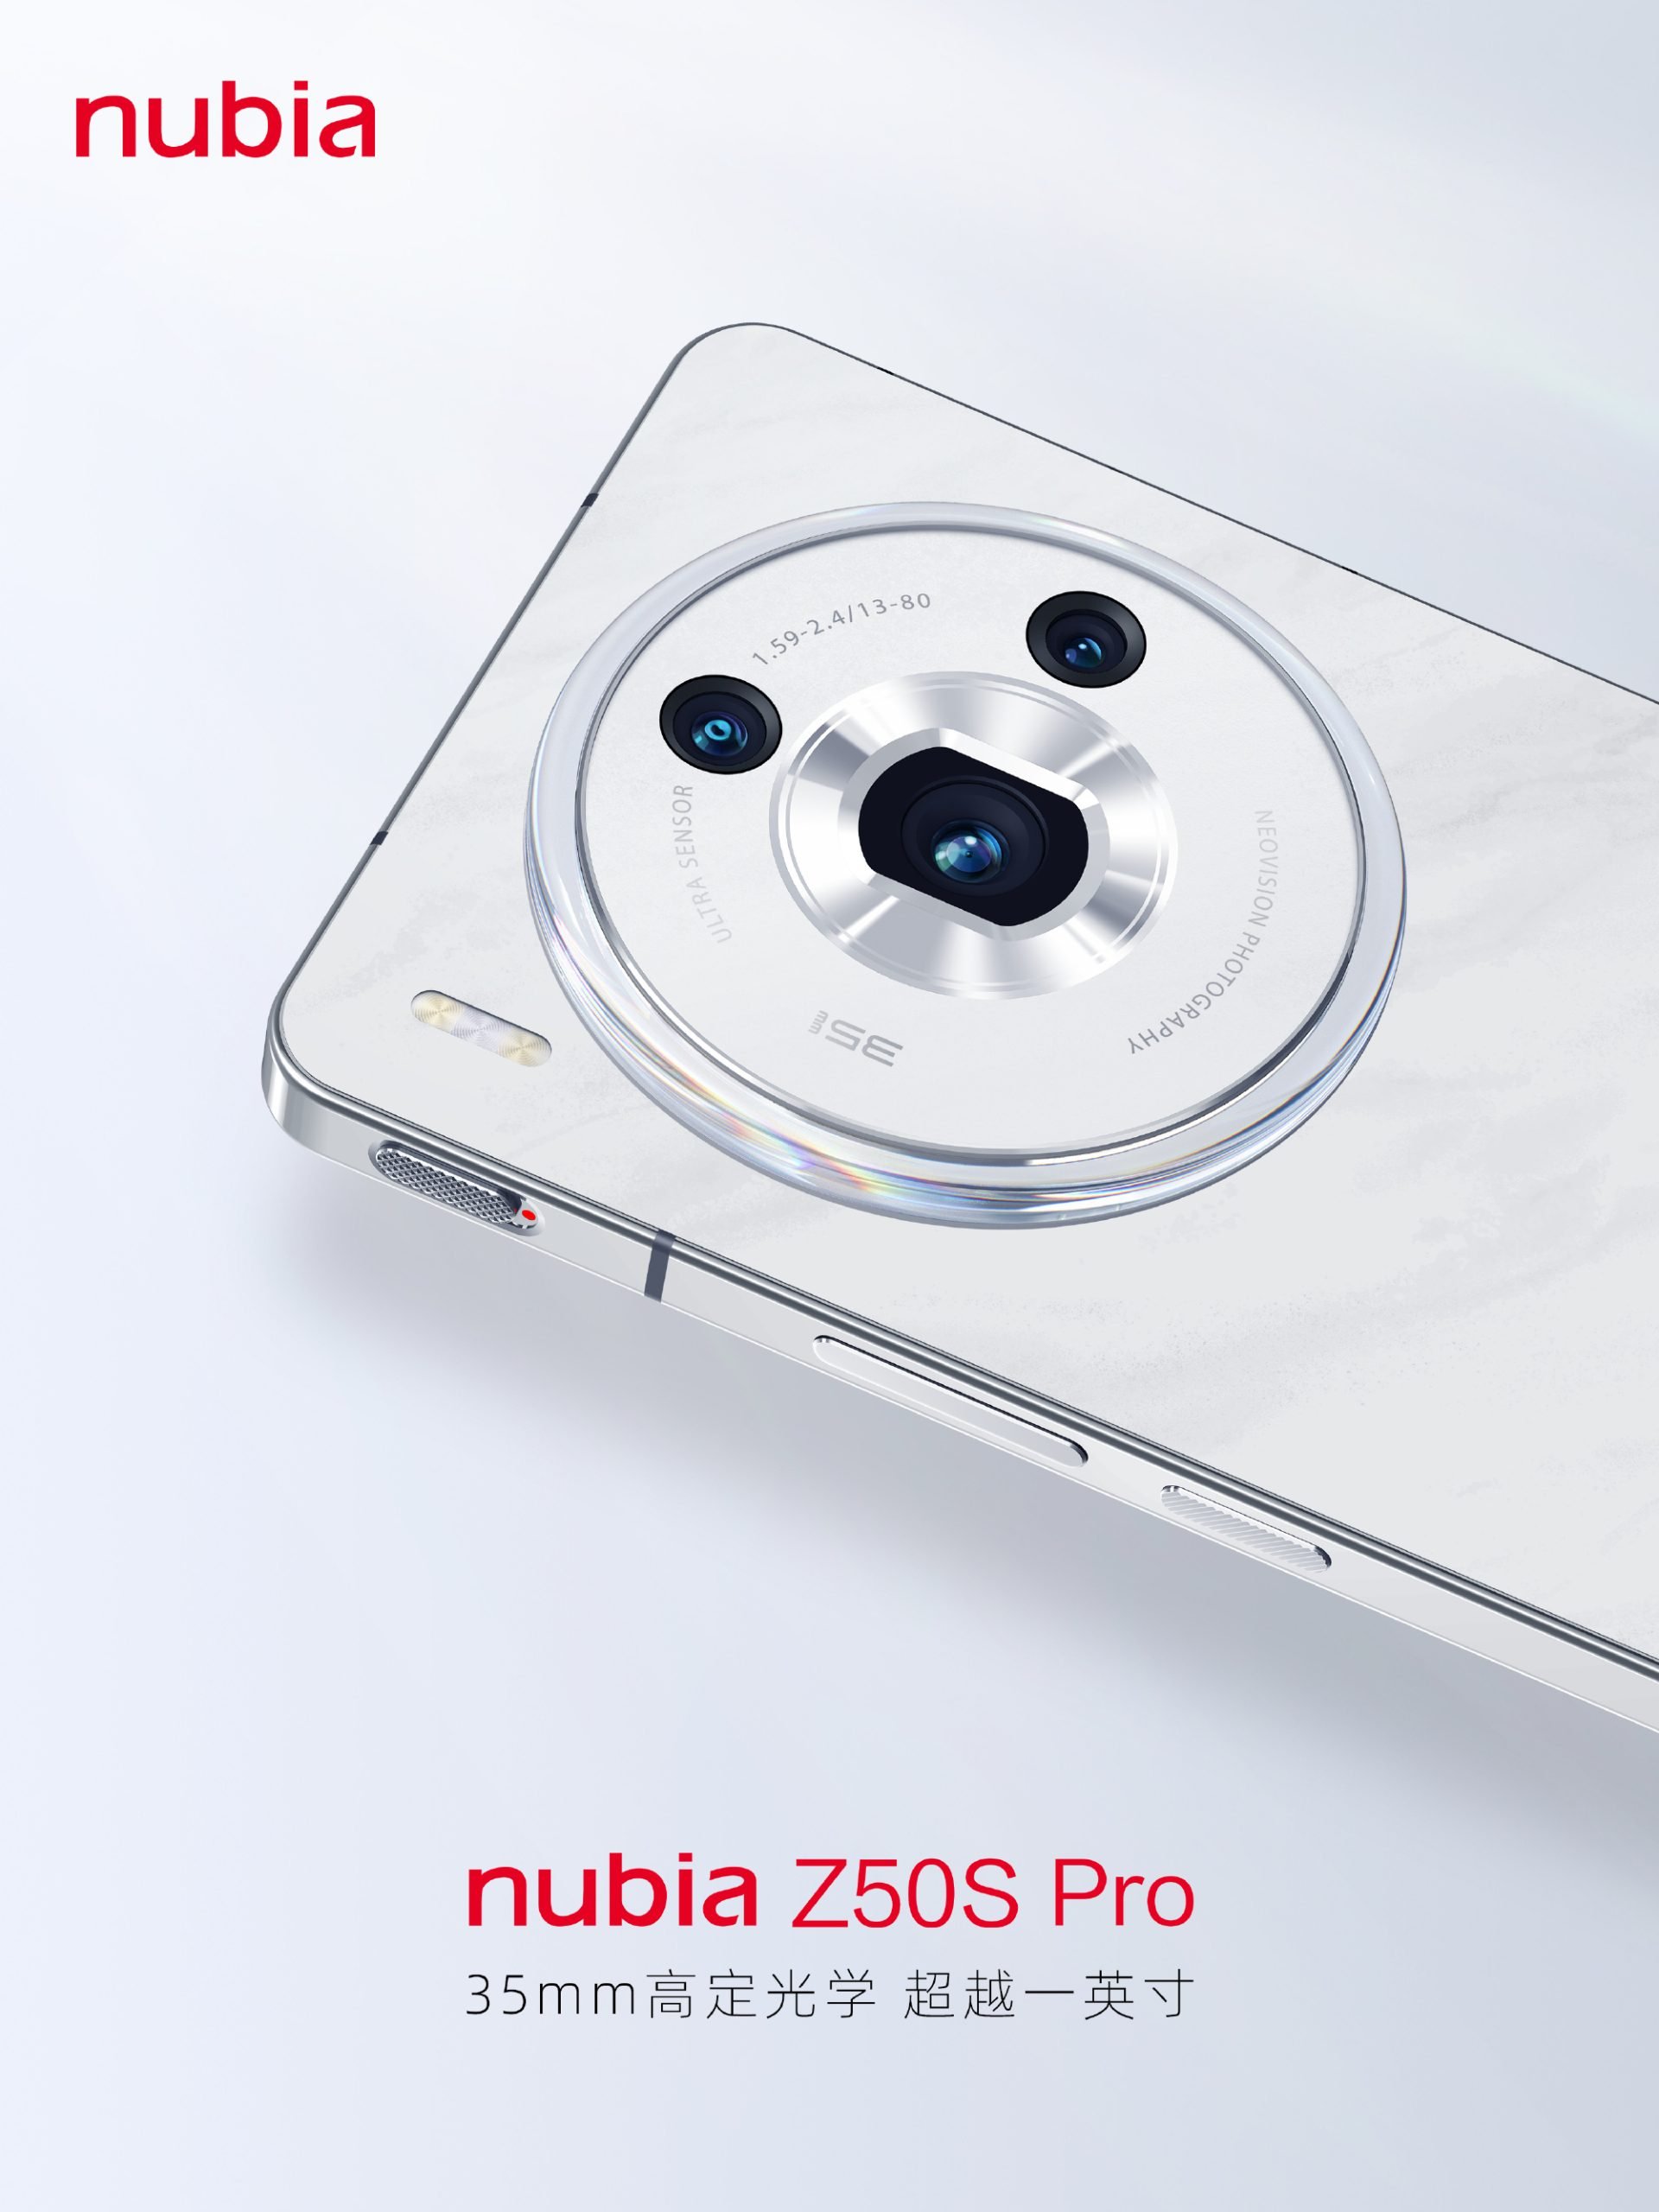 Nubia Z50S Pro Starlight Imaging Kit now available in China for 599 Yuan  ($82) - Gizmochina